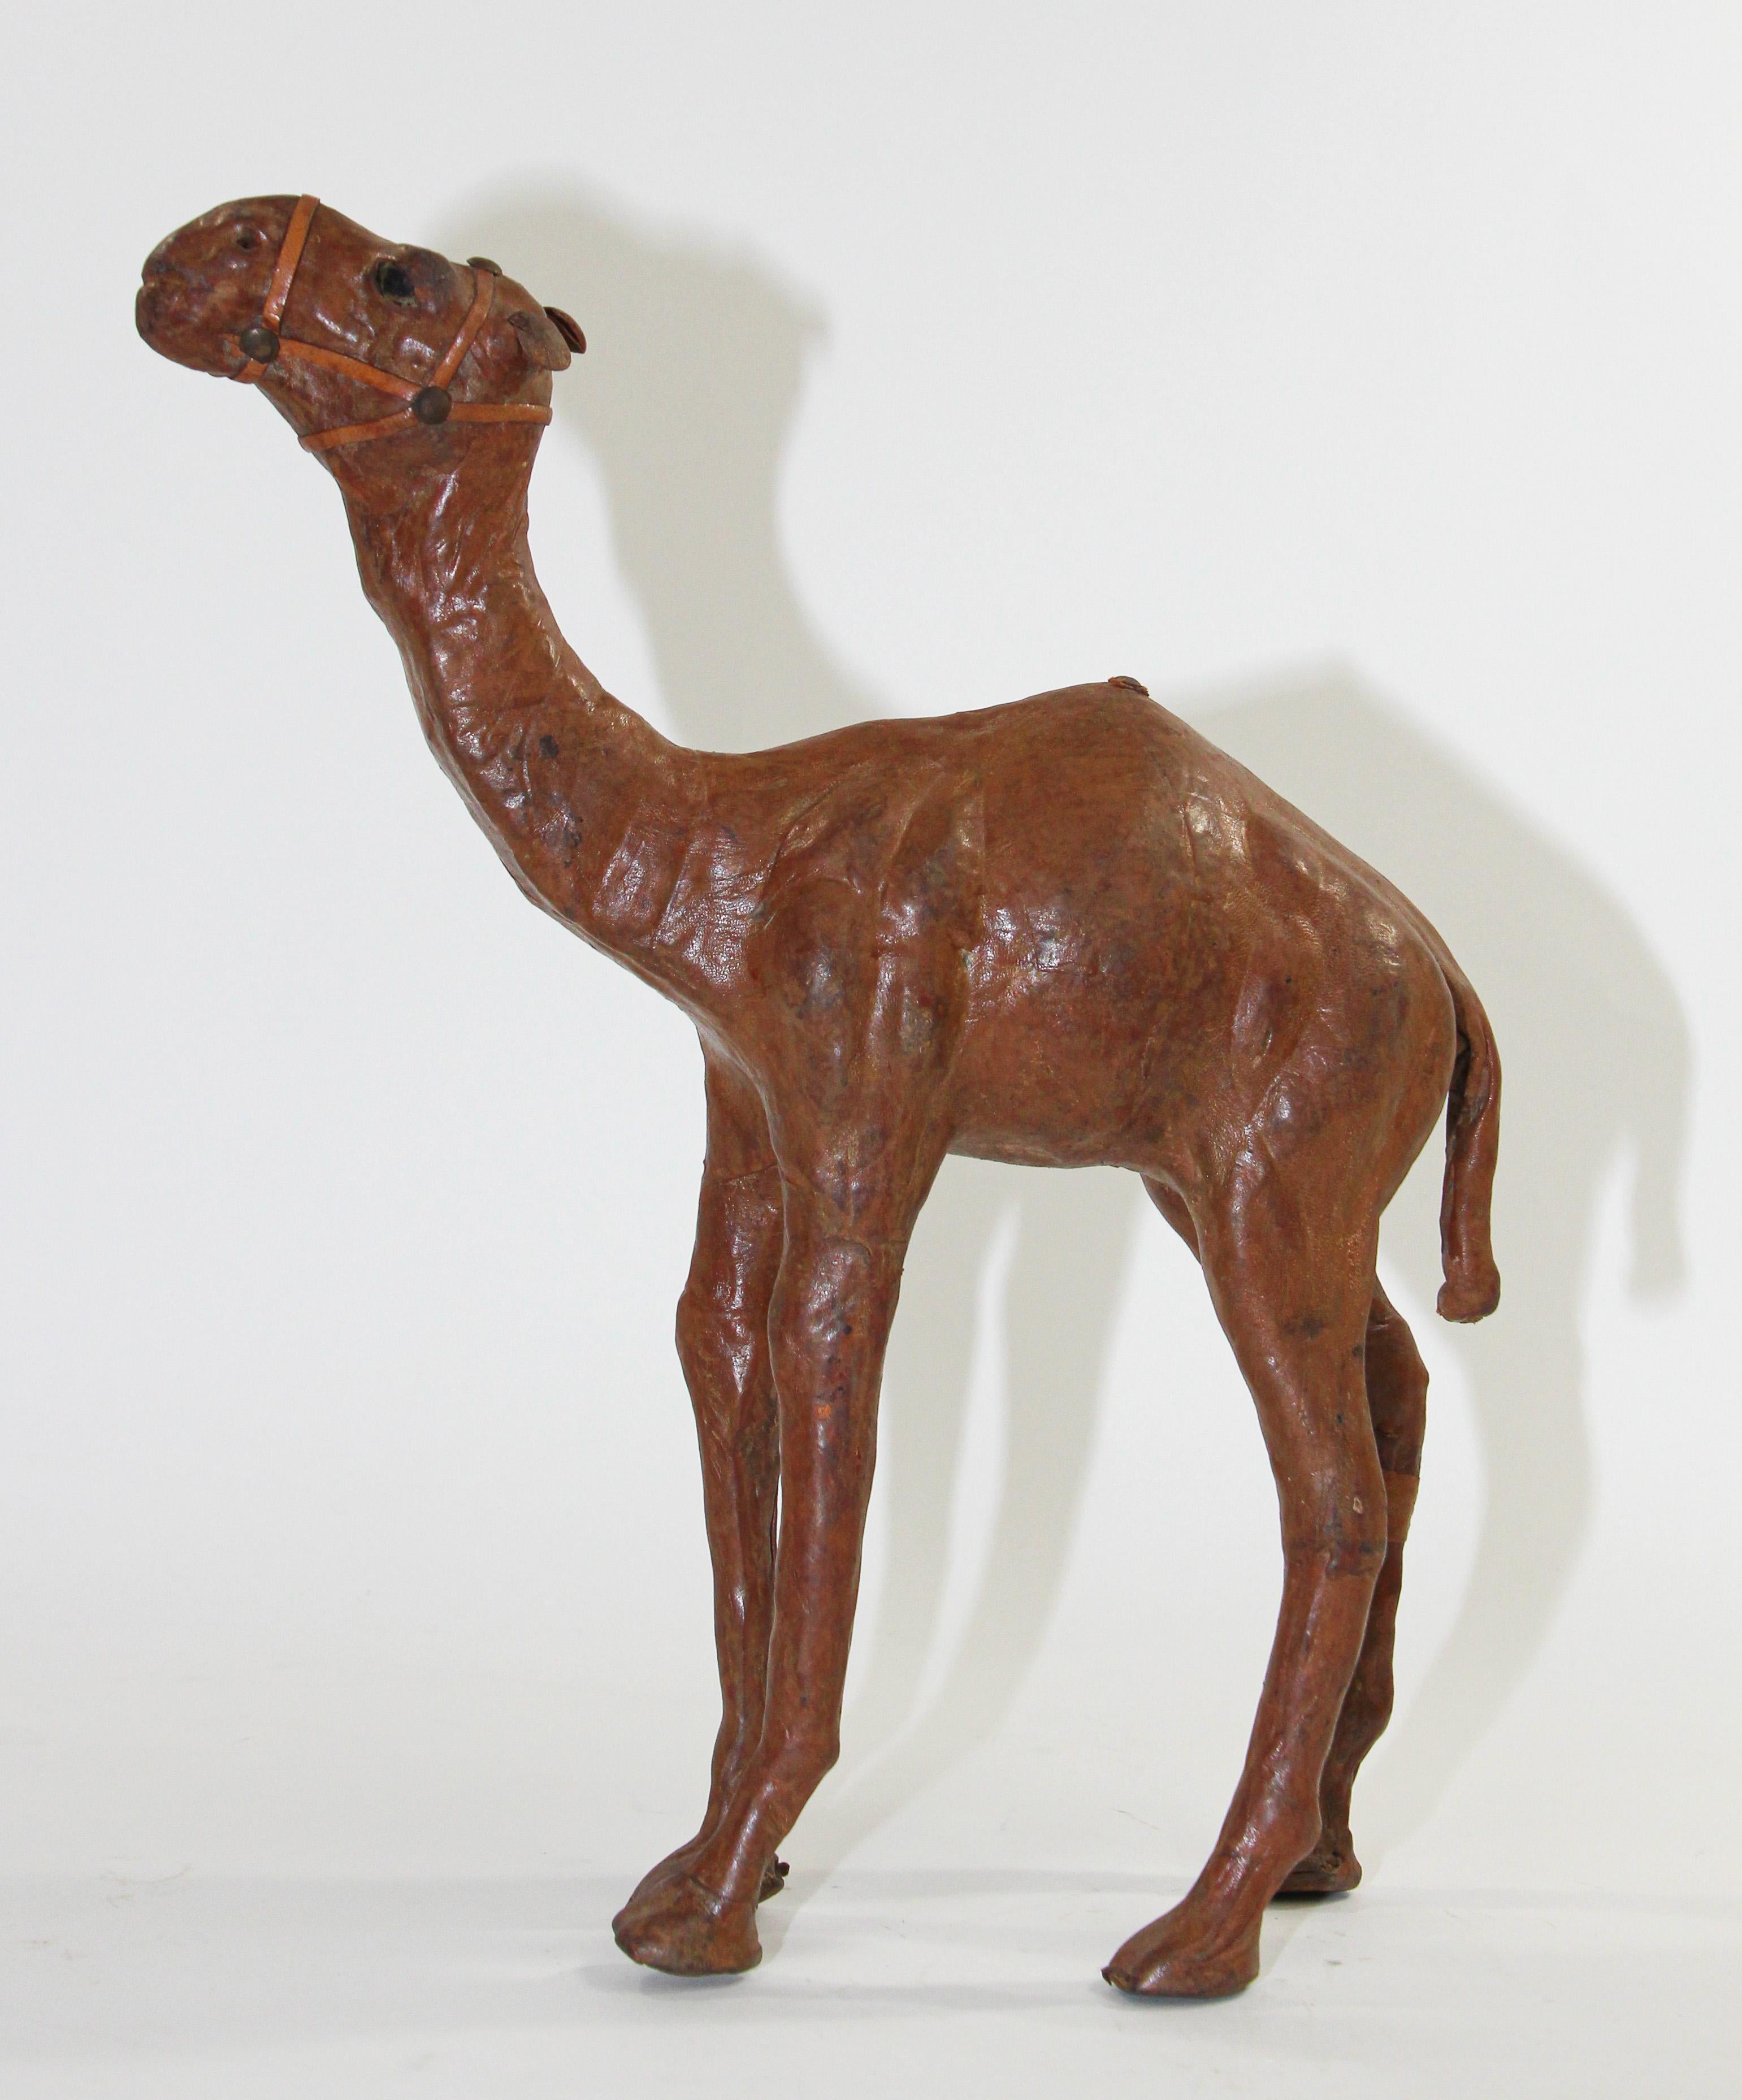 Vintage handcrafted leather wrapped standing camel
Leather wrapped Moroccan camel sculpture. 
From the 1970s, handmade in excellent vintage condition. 
Brown camel color leather, nicely done, leather has aged beautifully. 
Hand crafted in